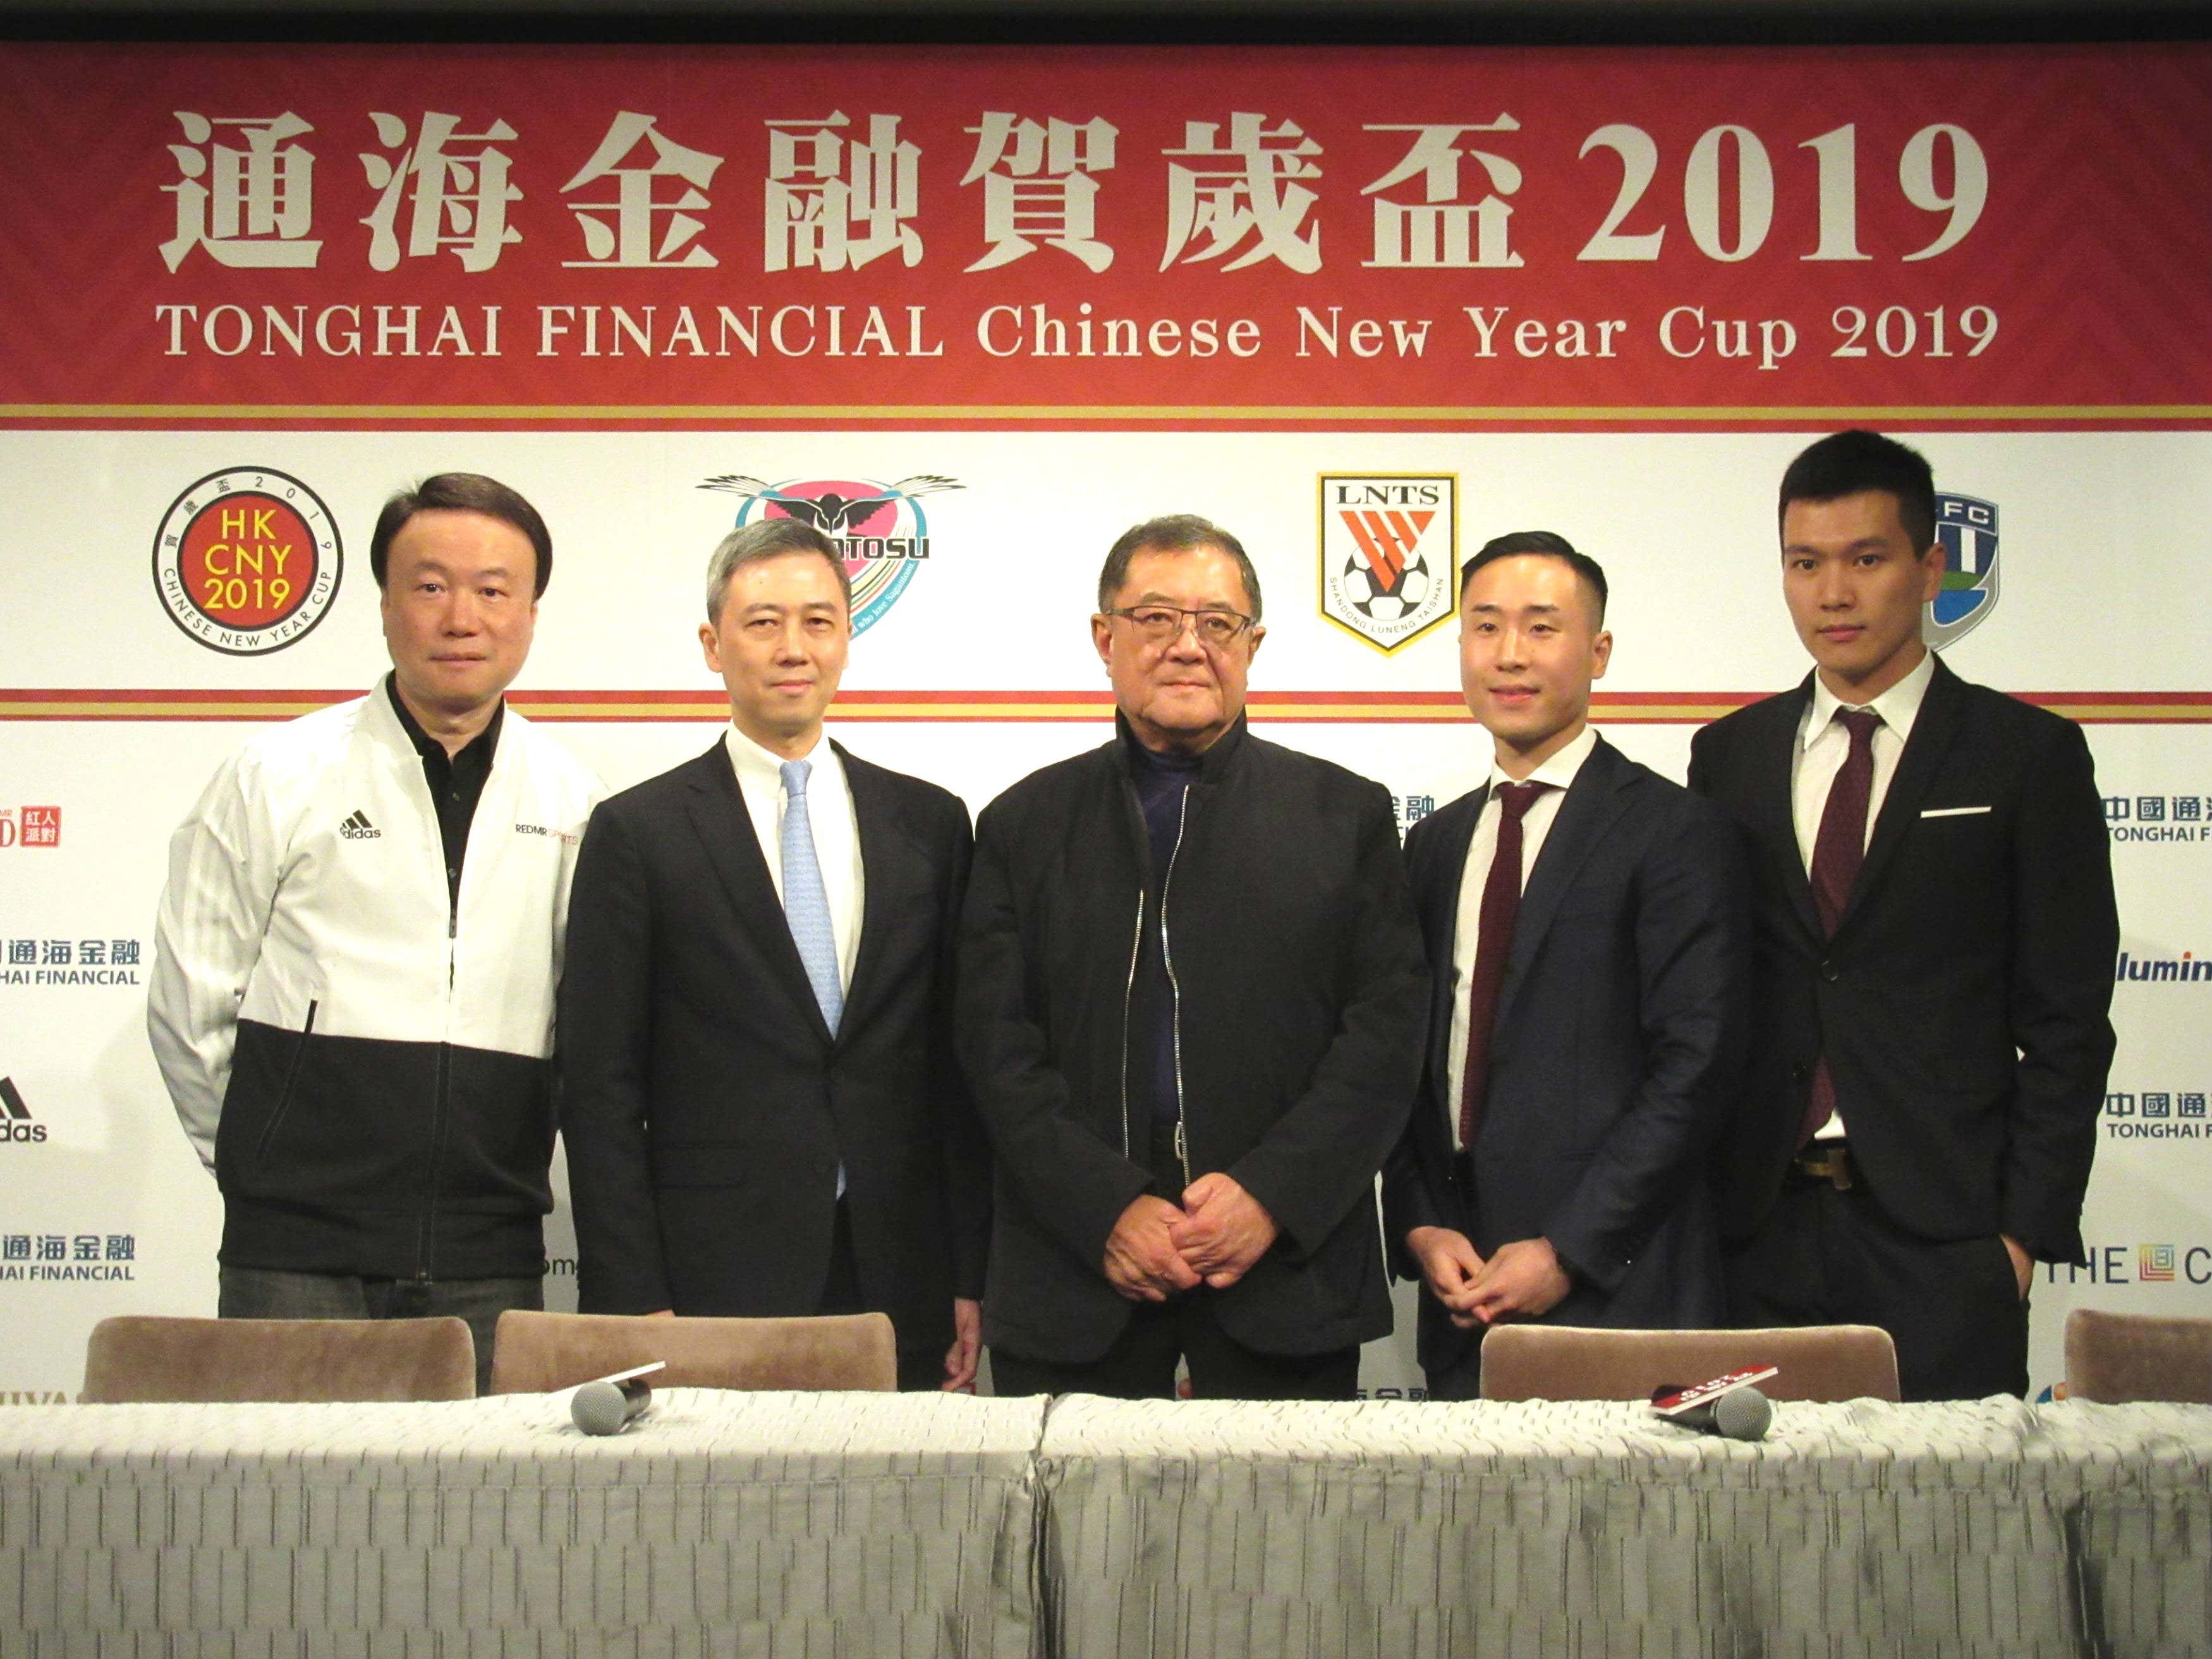 2019 Chinese new year cup press conference.